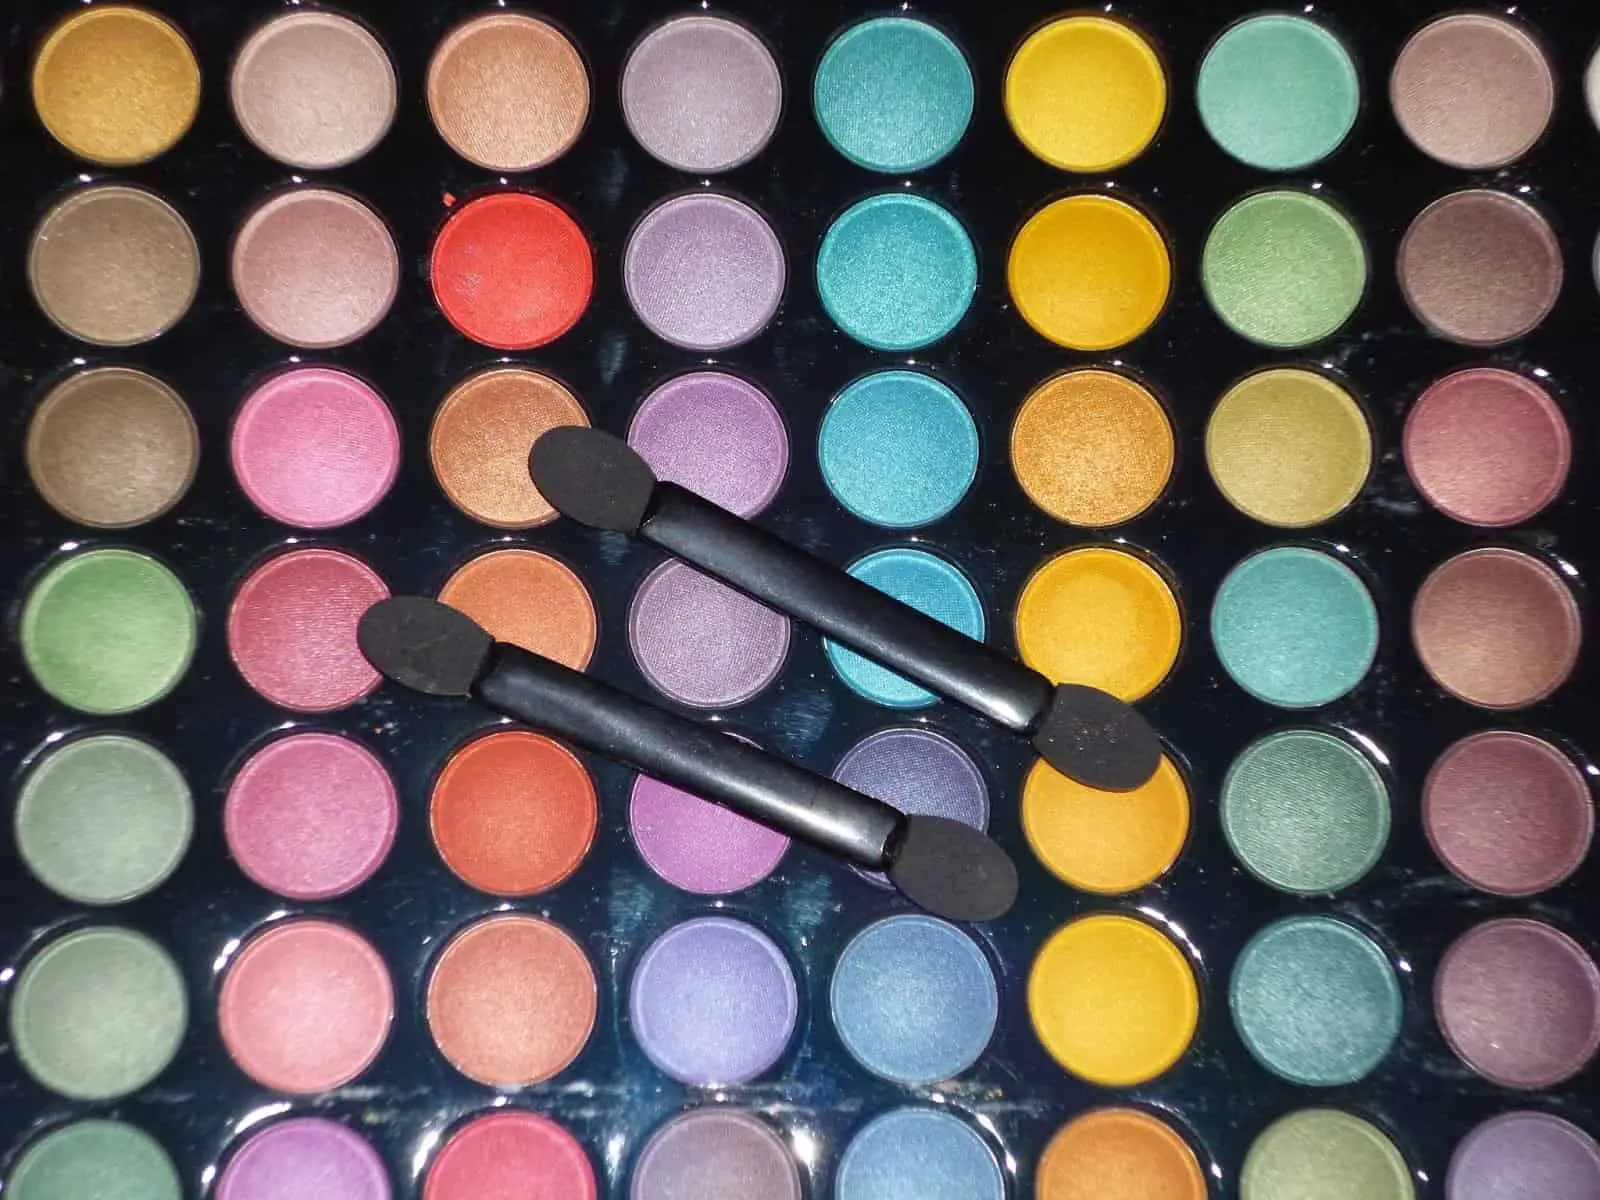 Tmart’s 32 Pieces Professional Cosmetic Makeup Brush Set Review